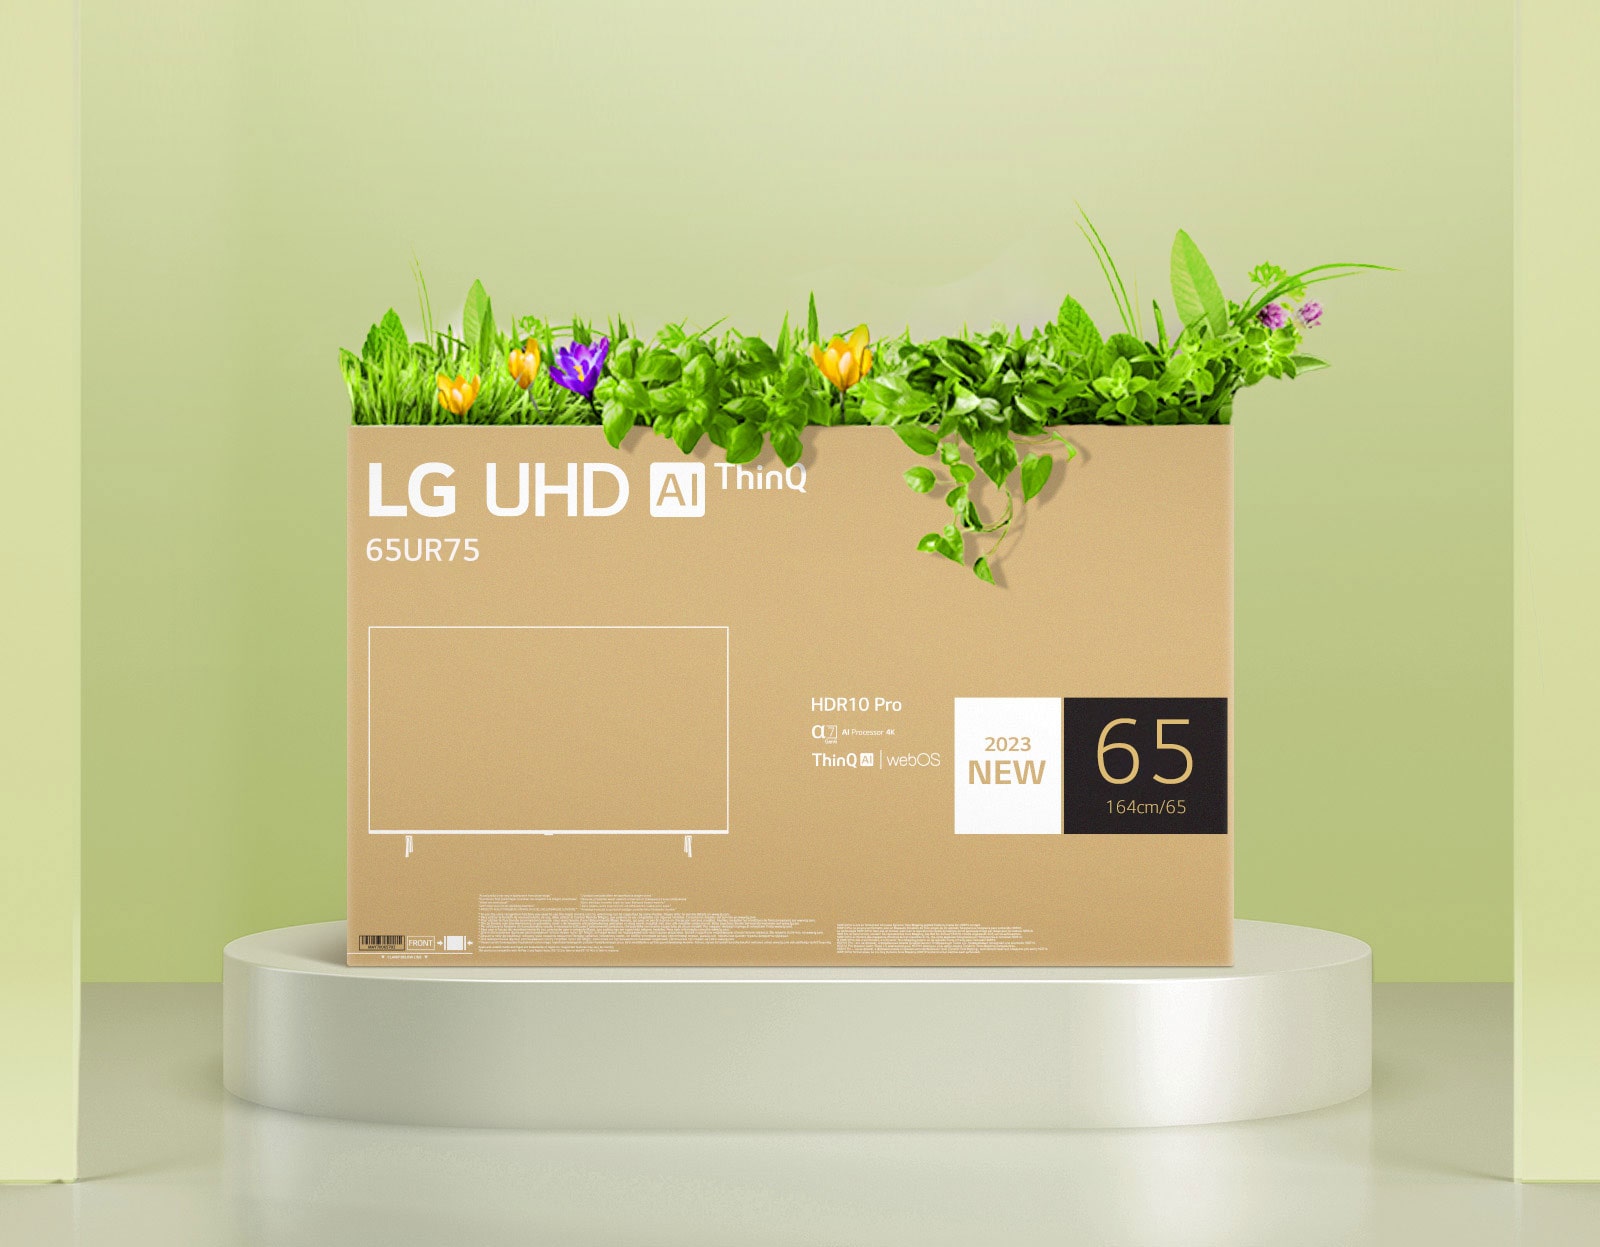 LG-65UR7550PSC-A flower box upcycled using an LG UHD TV box packaging.